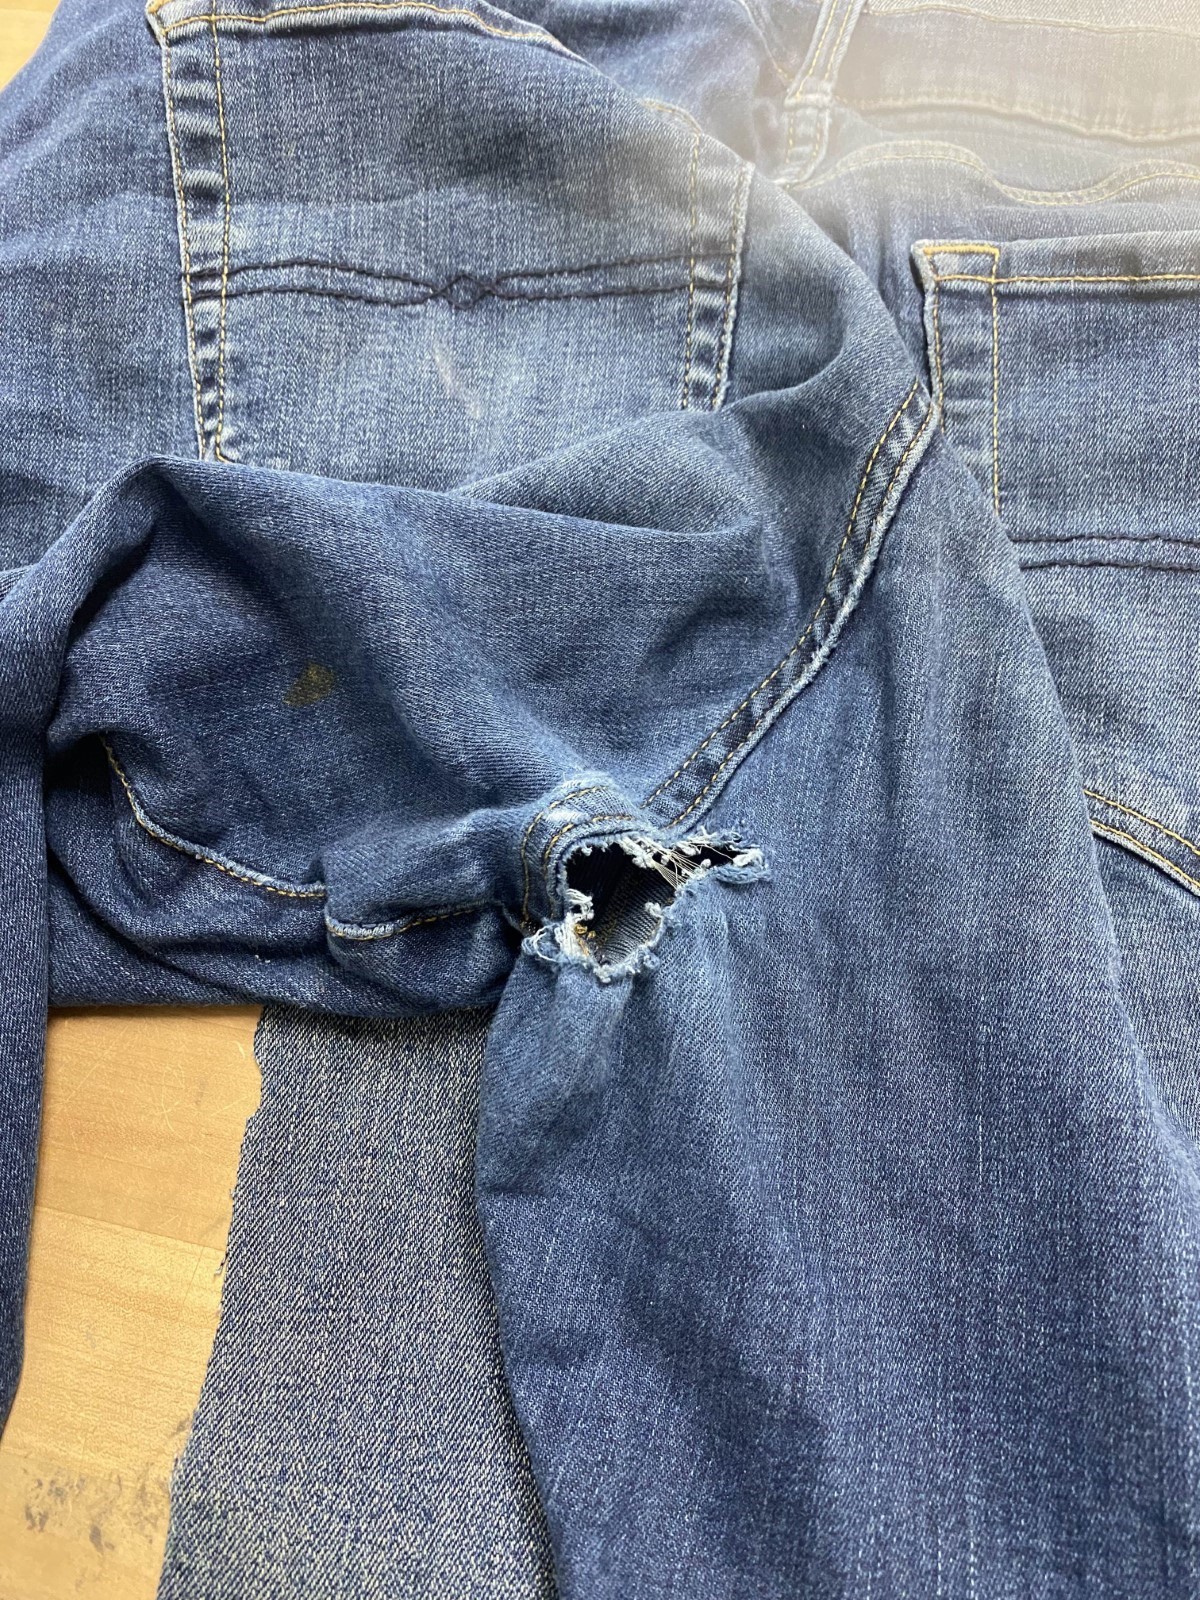 A pair of blue jeans with a hole near the rear center seam.